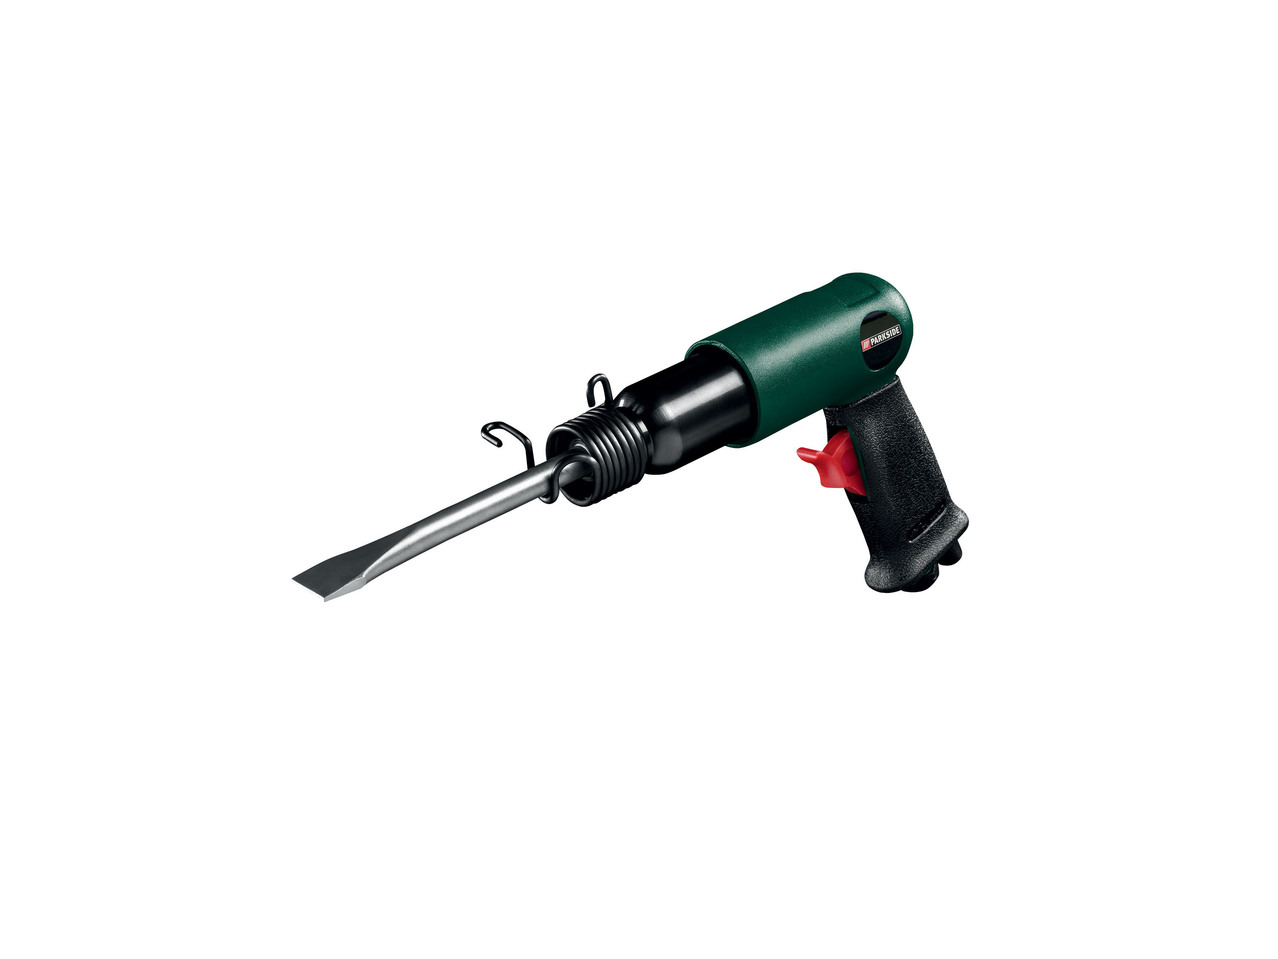 Pneumatic Saw, Drill or Hammer Drill